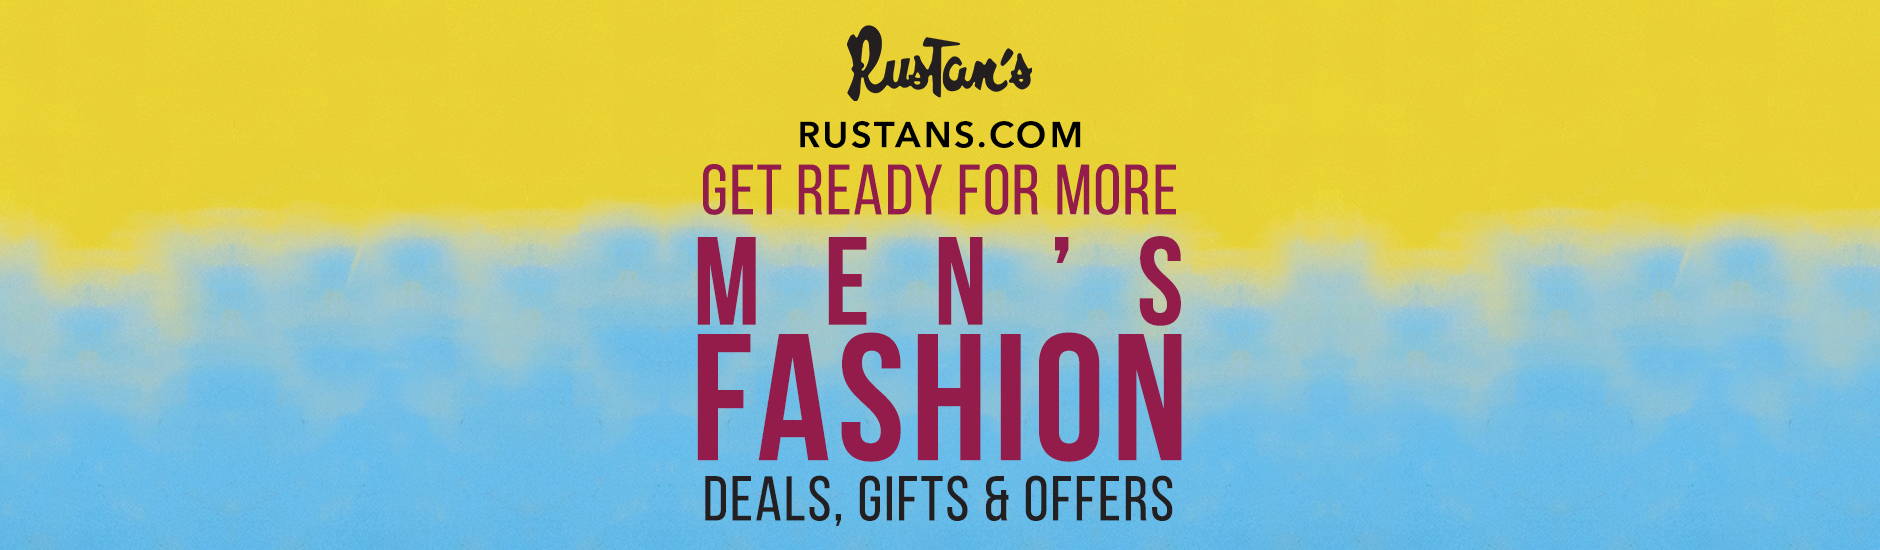 Get Ready for More Deals, Gifts & Offers: Men's Fashion